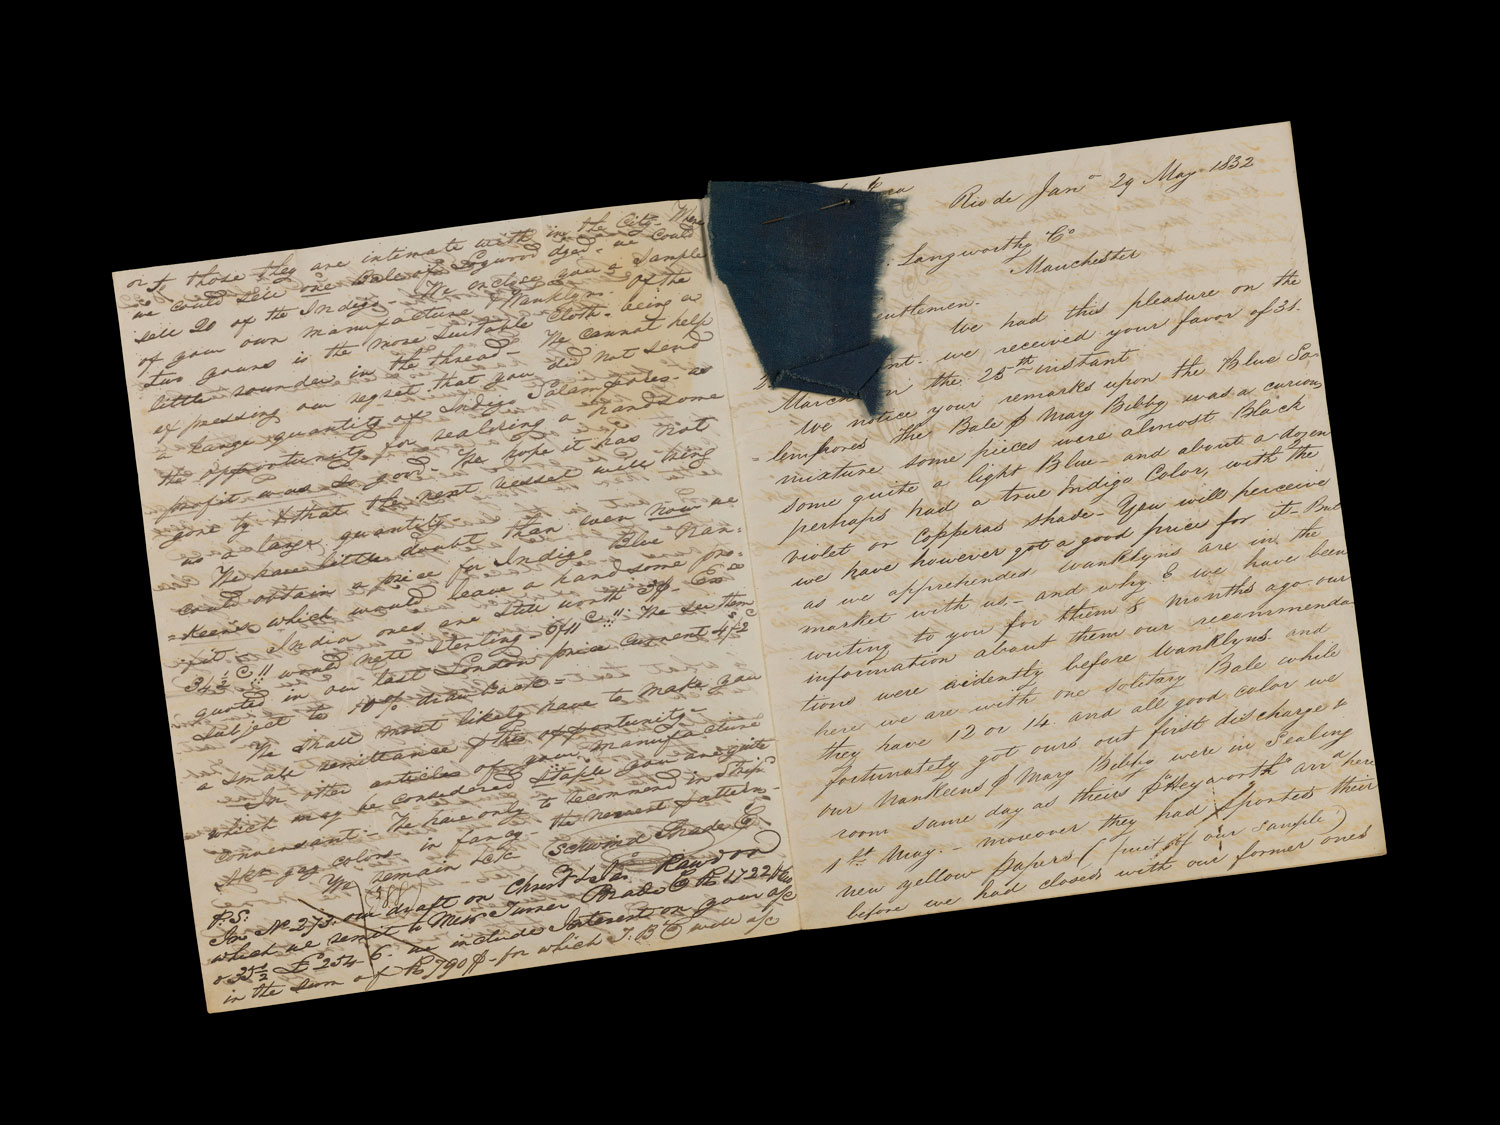 A handwritten letter from the 1830s with a textile sample attached.